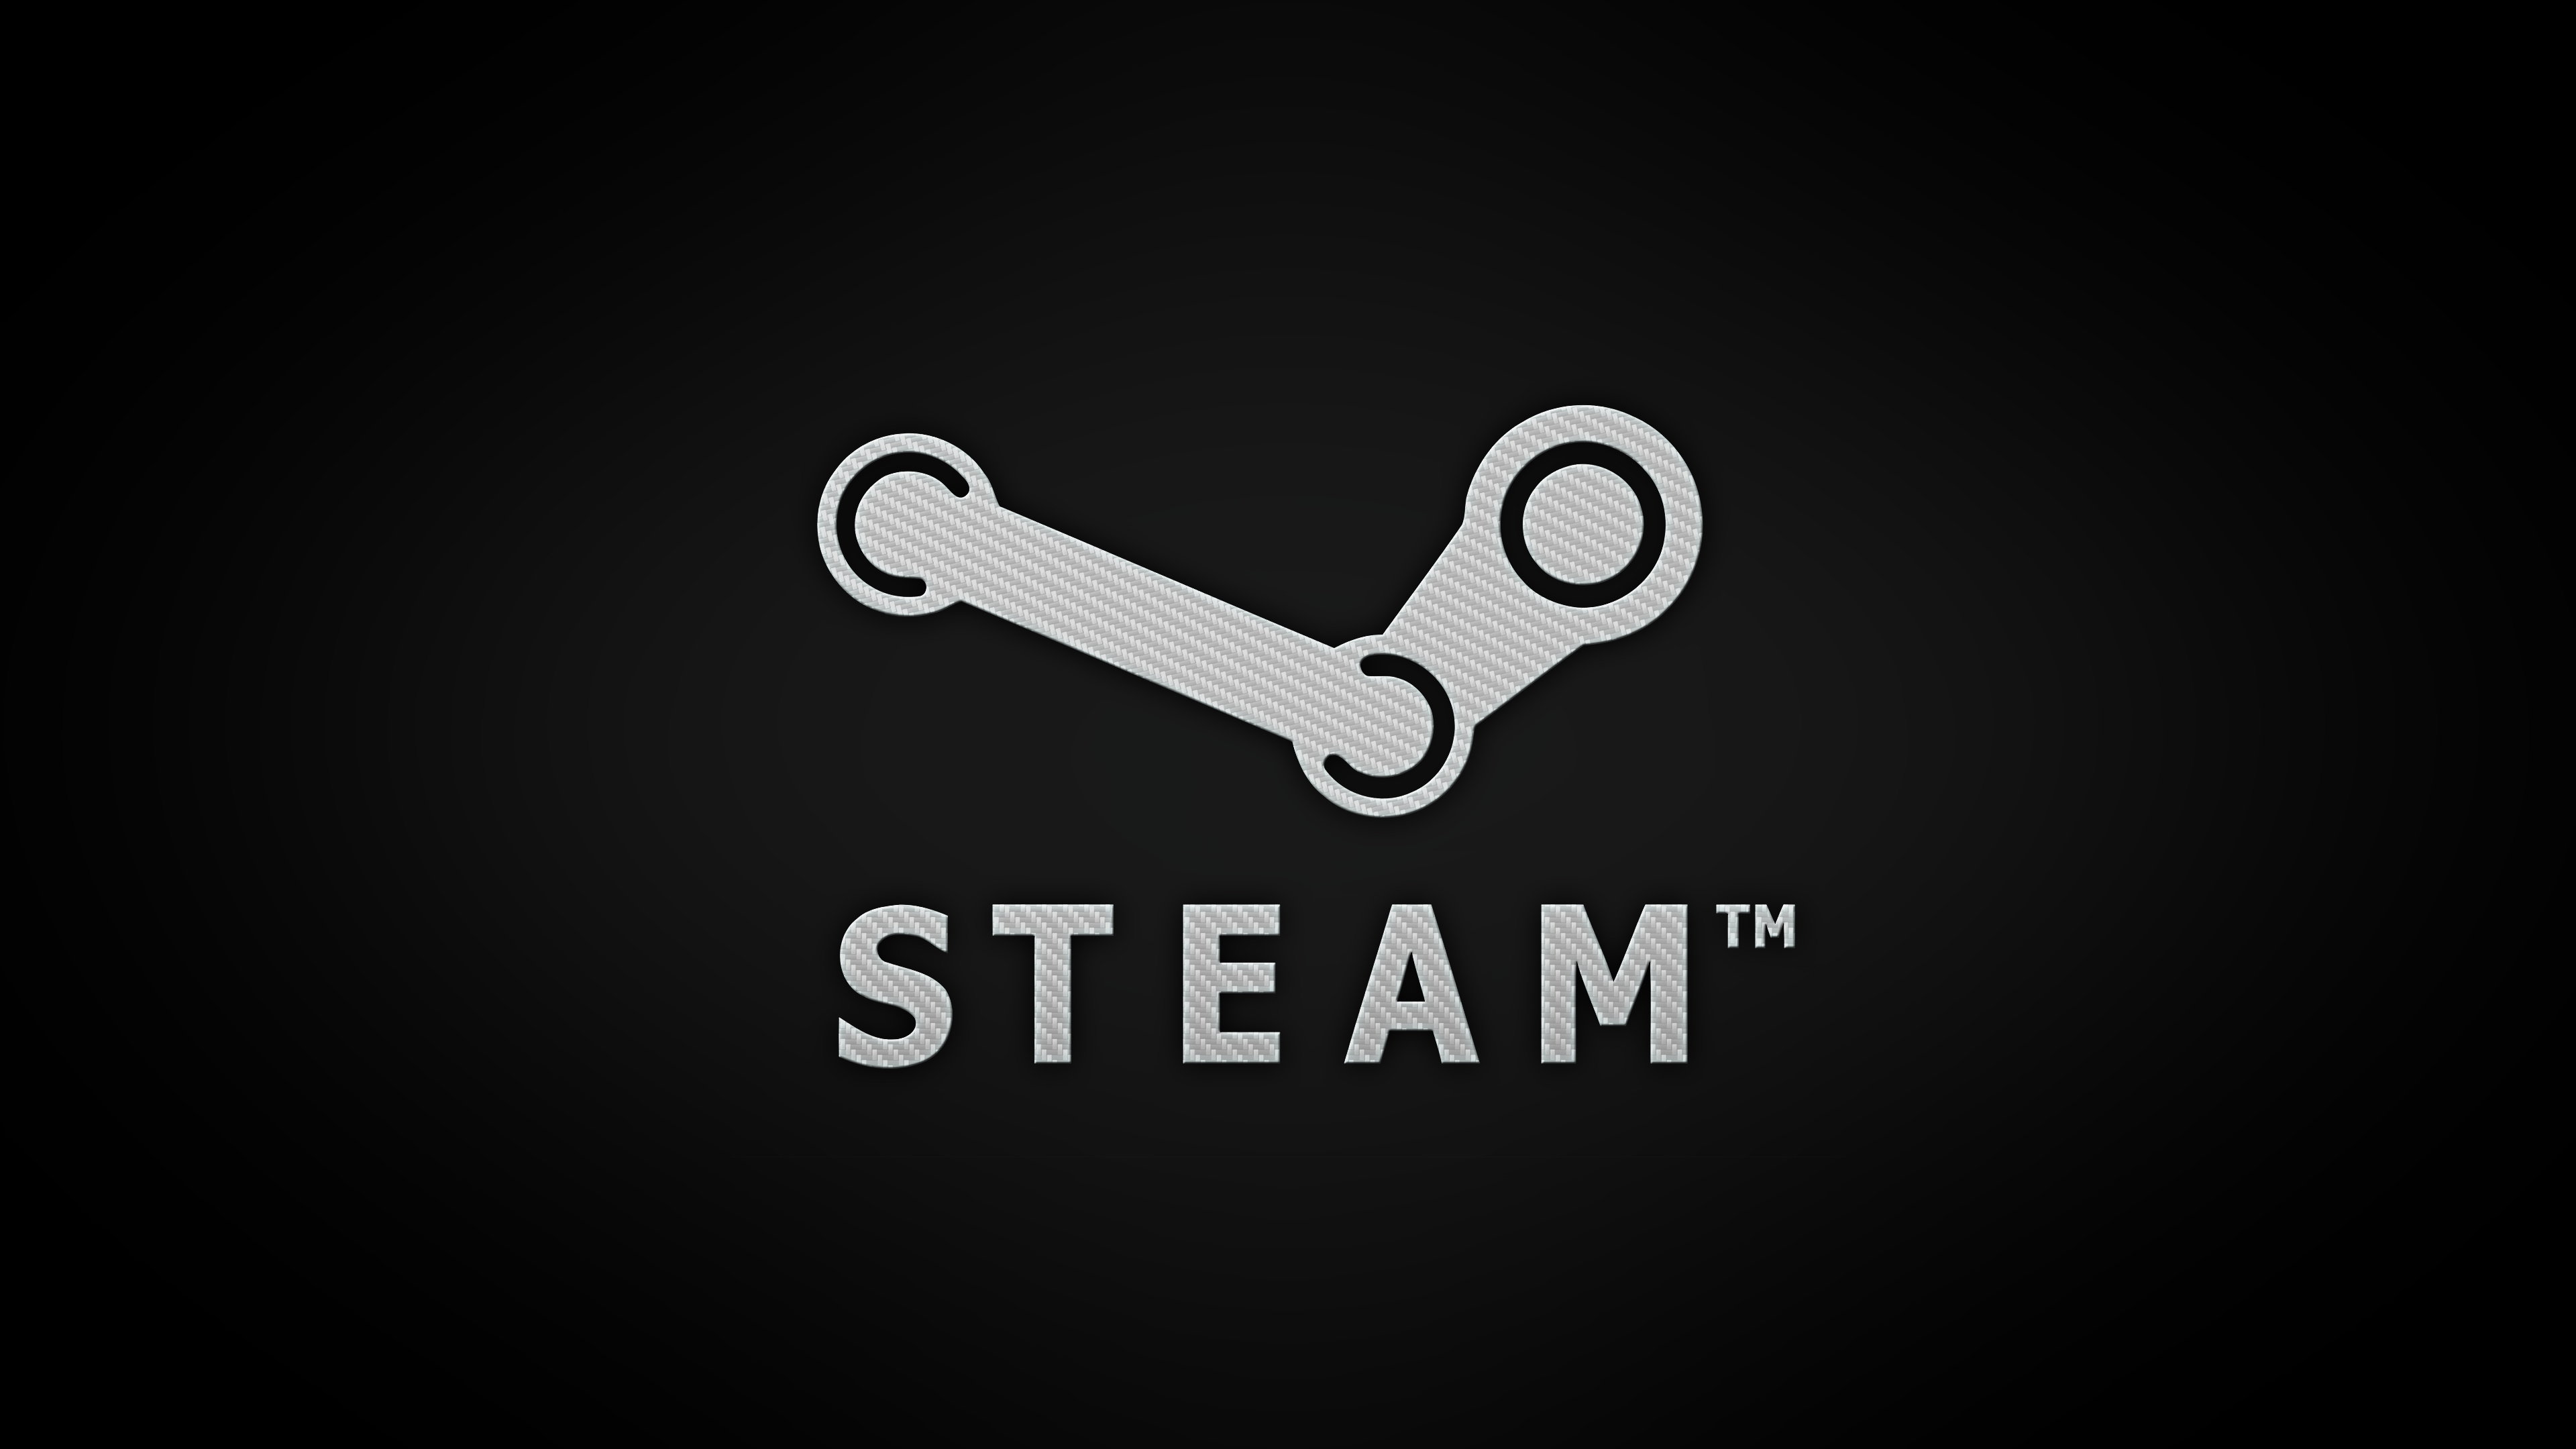 Steam: A digital platform created by Valve Corporation to serve as a distributor of PC games. 3840x2160 4K Background.